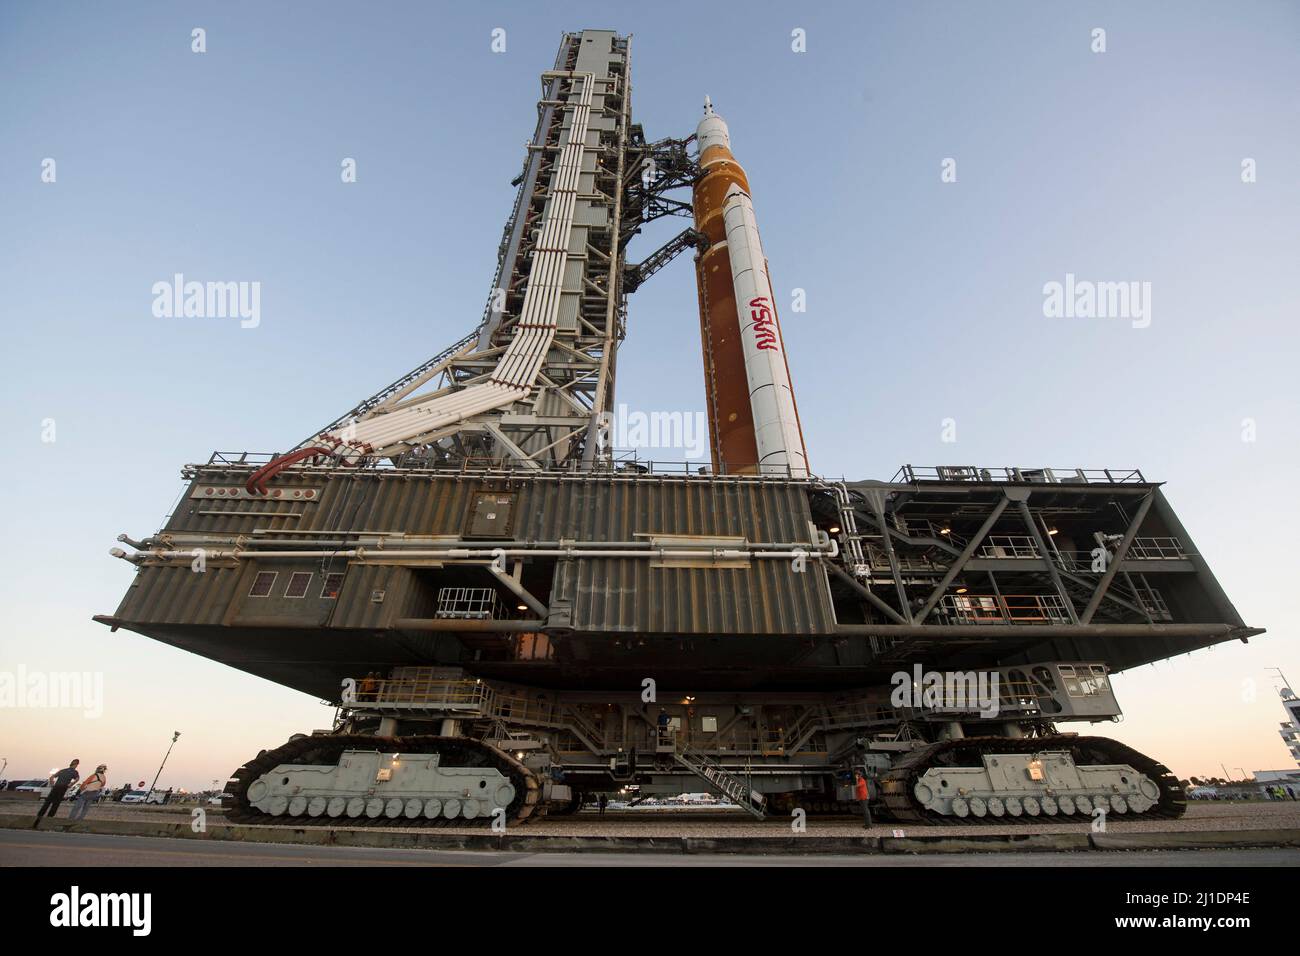 NASA’s Space Launch System (SLS) rocket with the Orion spacecraft aboard is seen atop a mobile launcher as it rolls out to Launch Complex 39B for the first time, Thursday, March 17, 2022, at NASA’s Kennedy Space Center in Florida. Ahead of NASA’s Artemis I flight test, the fully stacked and integrated SLS rocket and Orion spacecraft will undergo a wet dress rehearsal at Launch Complex 39B to verify systems and practice countdown procedures for the first launch. Photo by Aubrey Gemignani/NASA via CNP/ABACAPRESS.COM Stock Photo